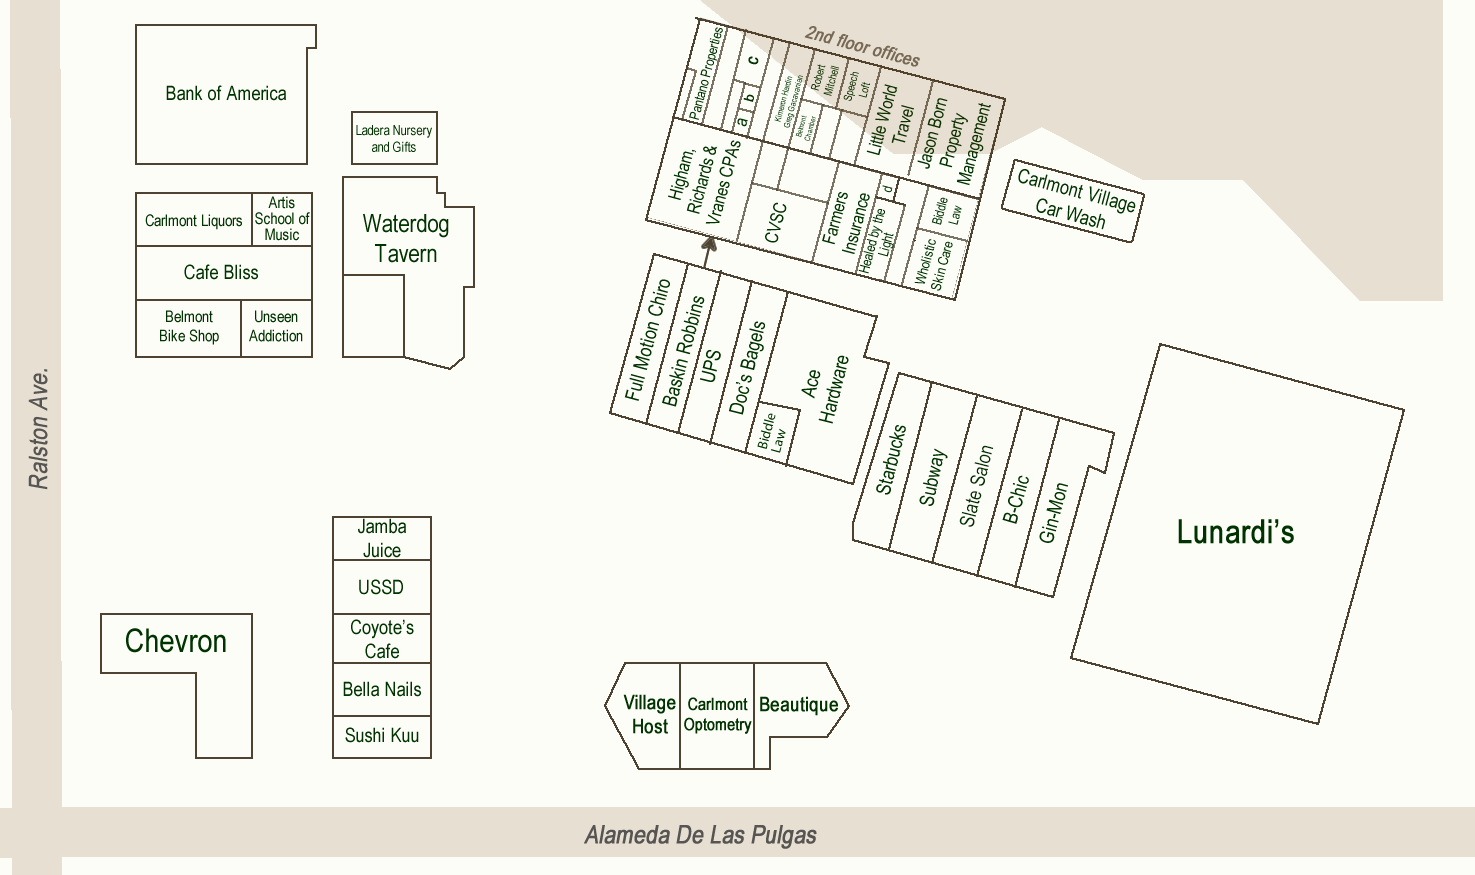 Carlmont Village Shopping Center Directory Map